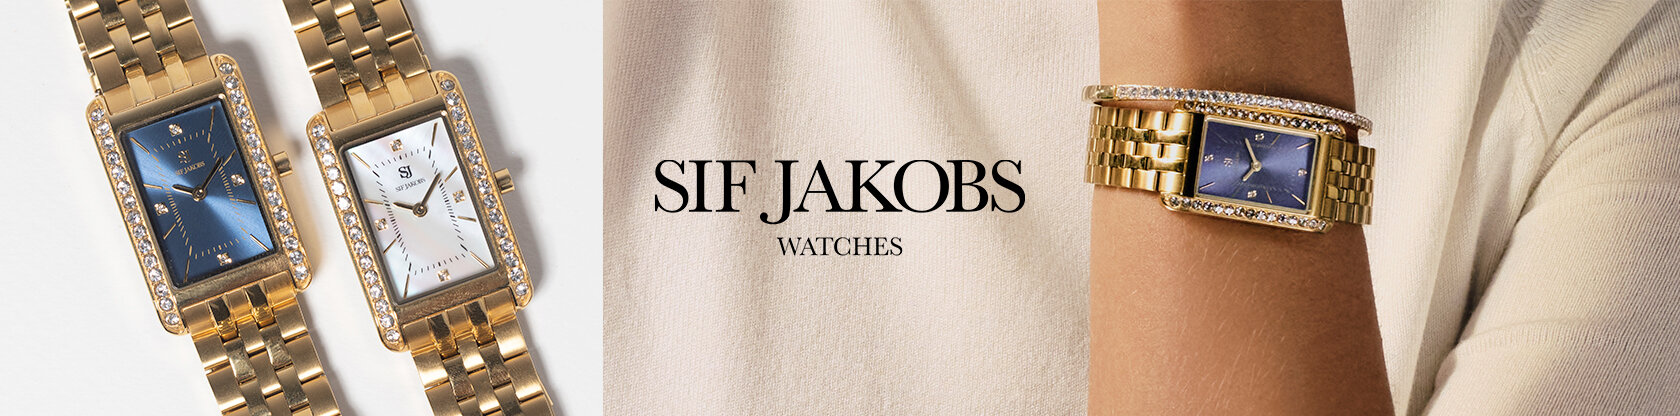 Sif Jakobs Watches